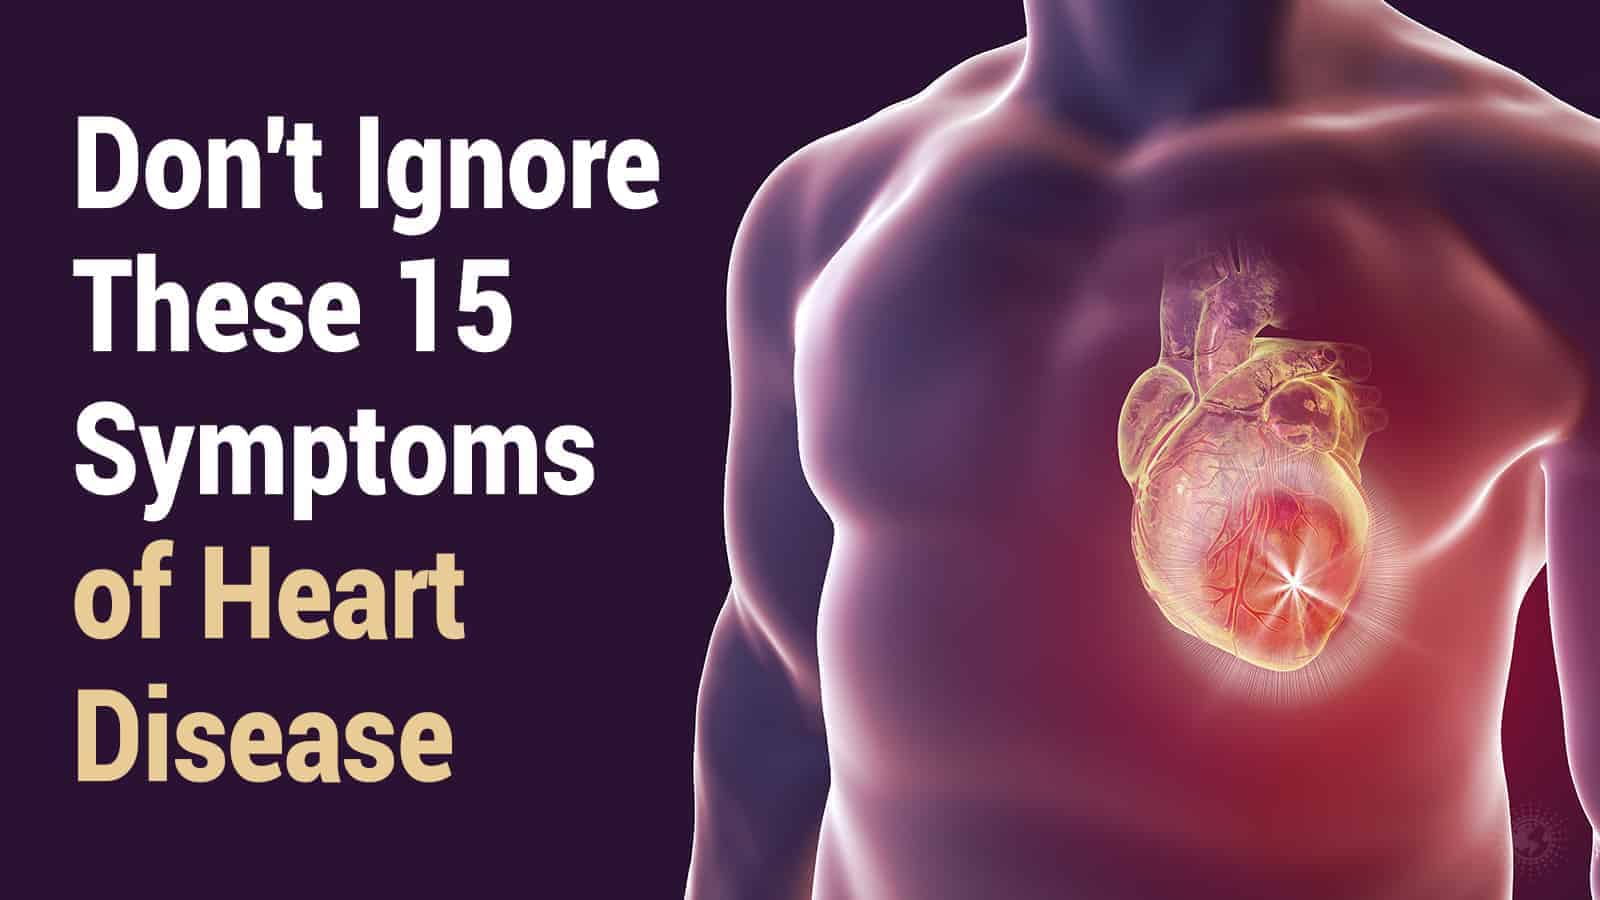 Don’t Ignore These 15 Symptoms of Heart Disease